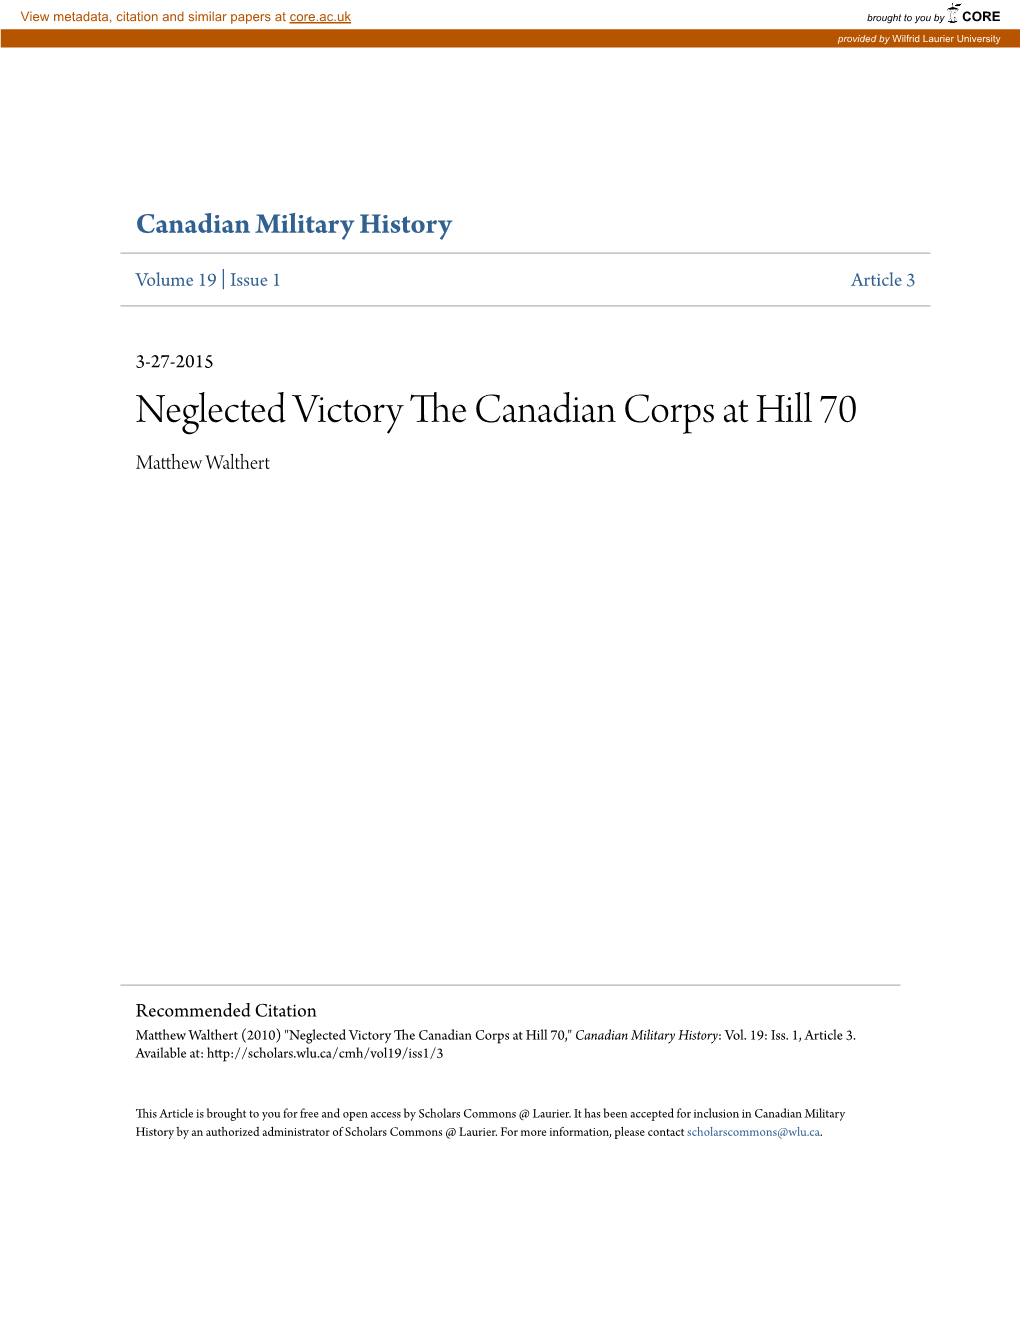 Neglected Victory the Canadian Corps at Hill 70 Neglected Victory the Canadian Corps at Hill 70